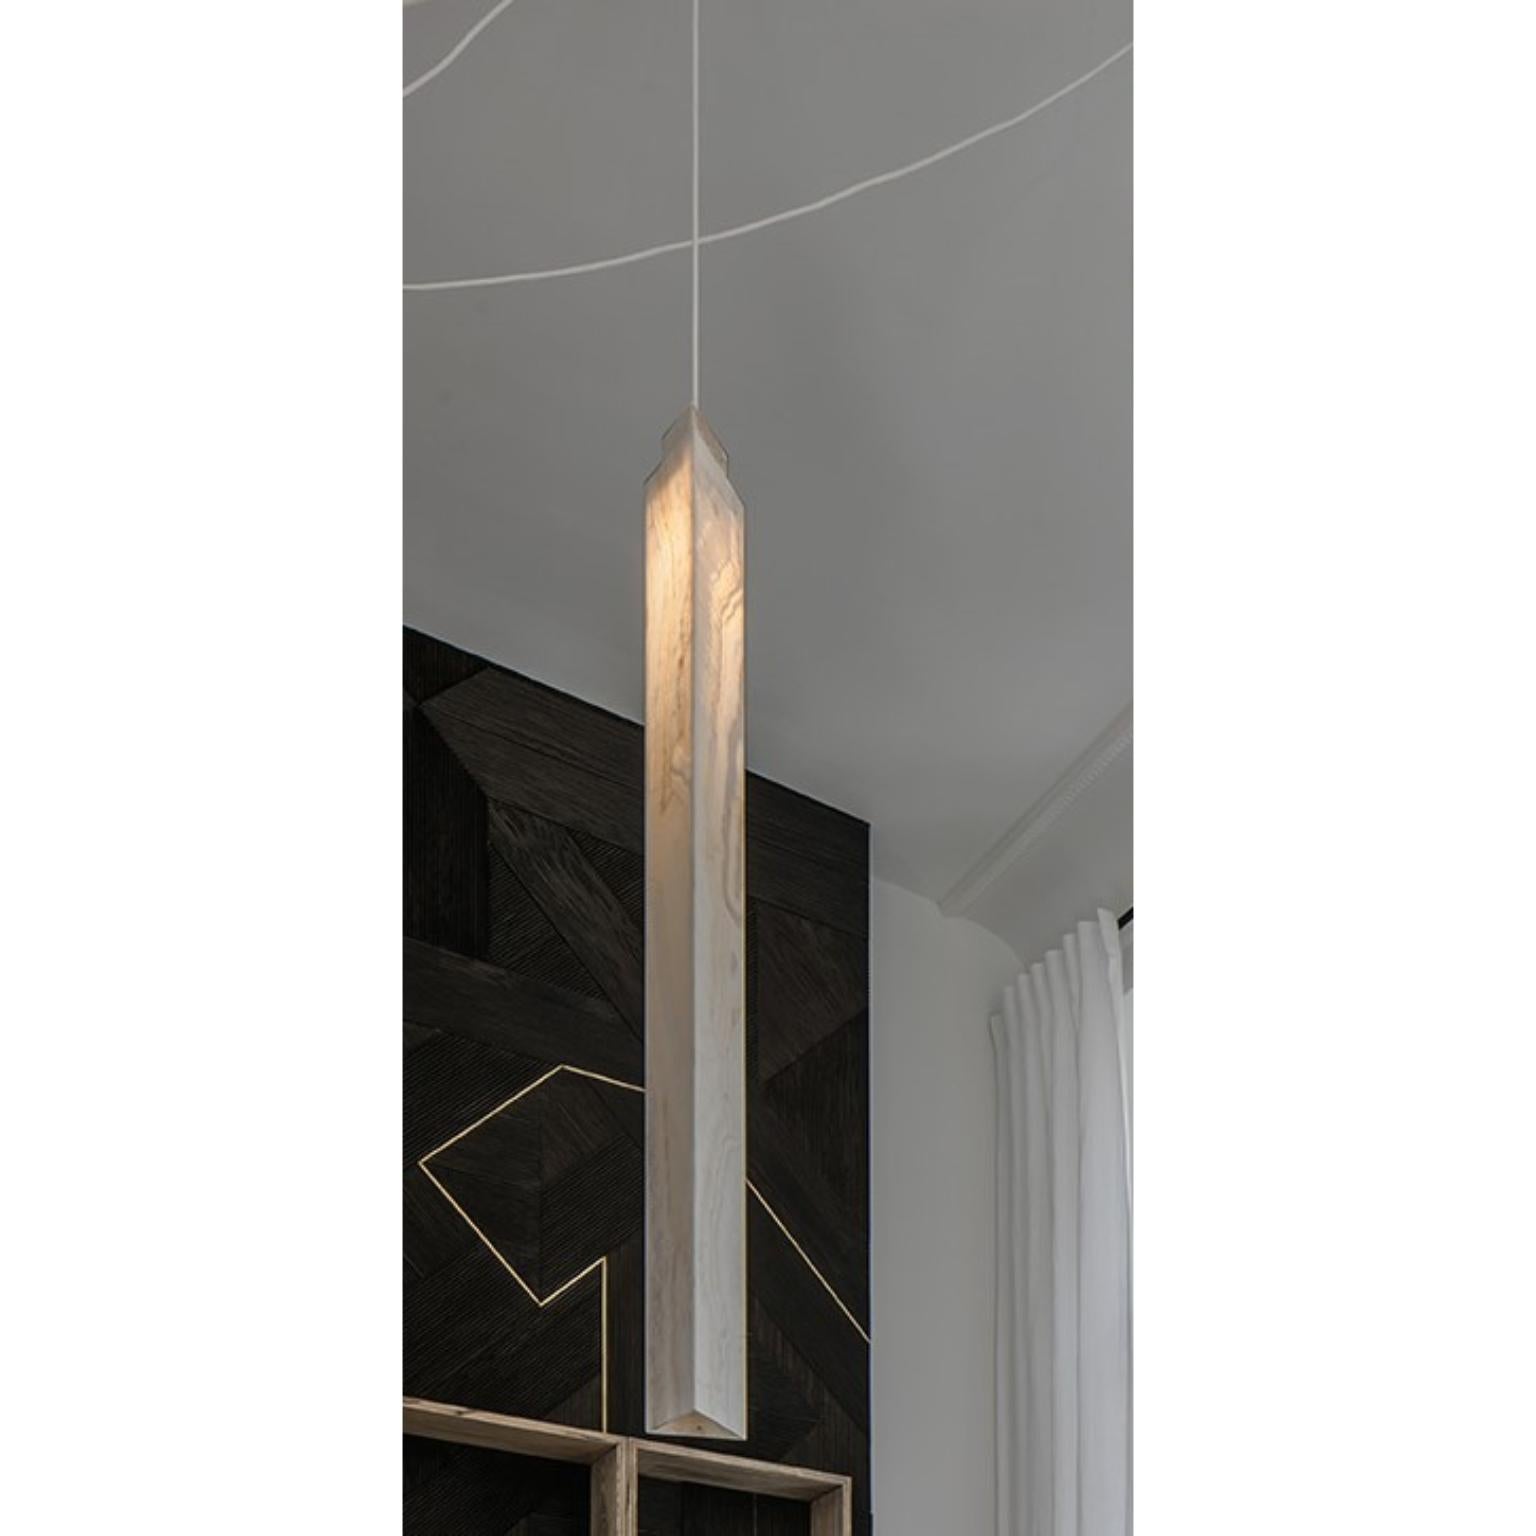 Unique Triangle Pendant Lamp by Koen Van Guijze
Dimensions: W128 x D128x H 1800 cm
Materials: Onyx

Onyx pendant in a triangle shape, vive l’art de la lumière.

After a career of more than 25 years in the lighting business as a lighting architect,